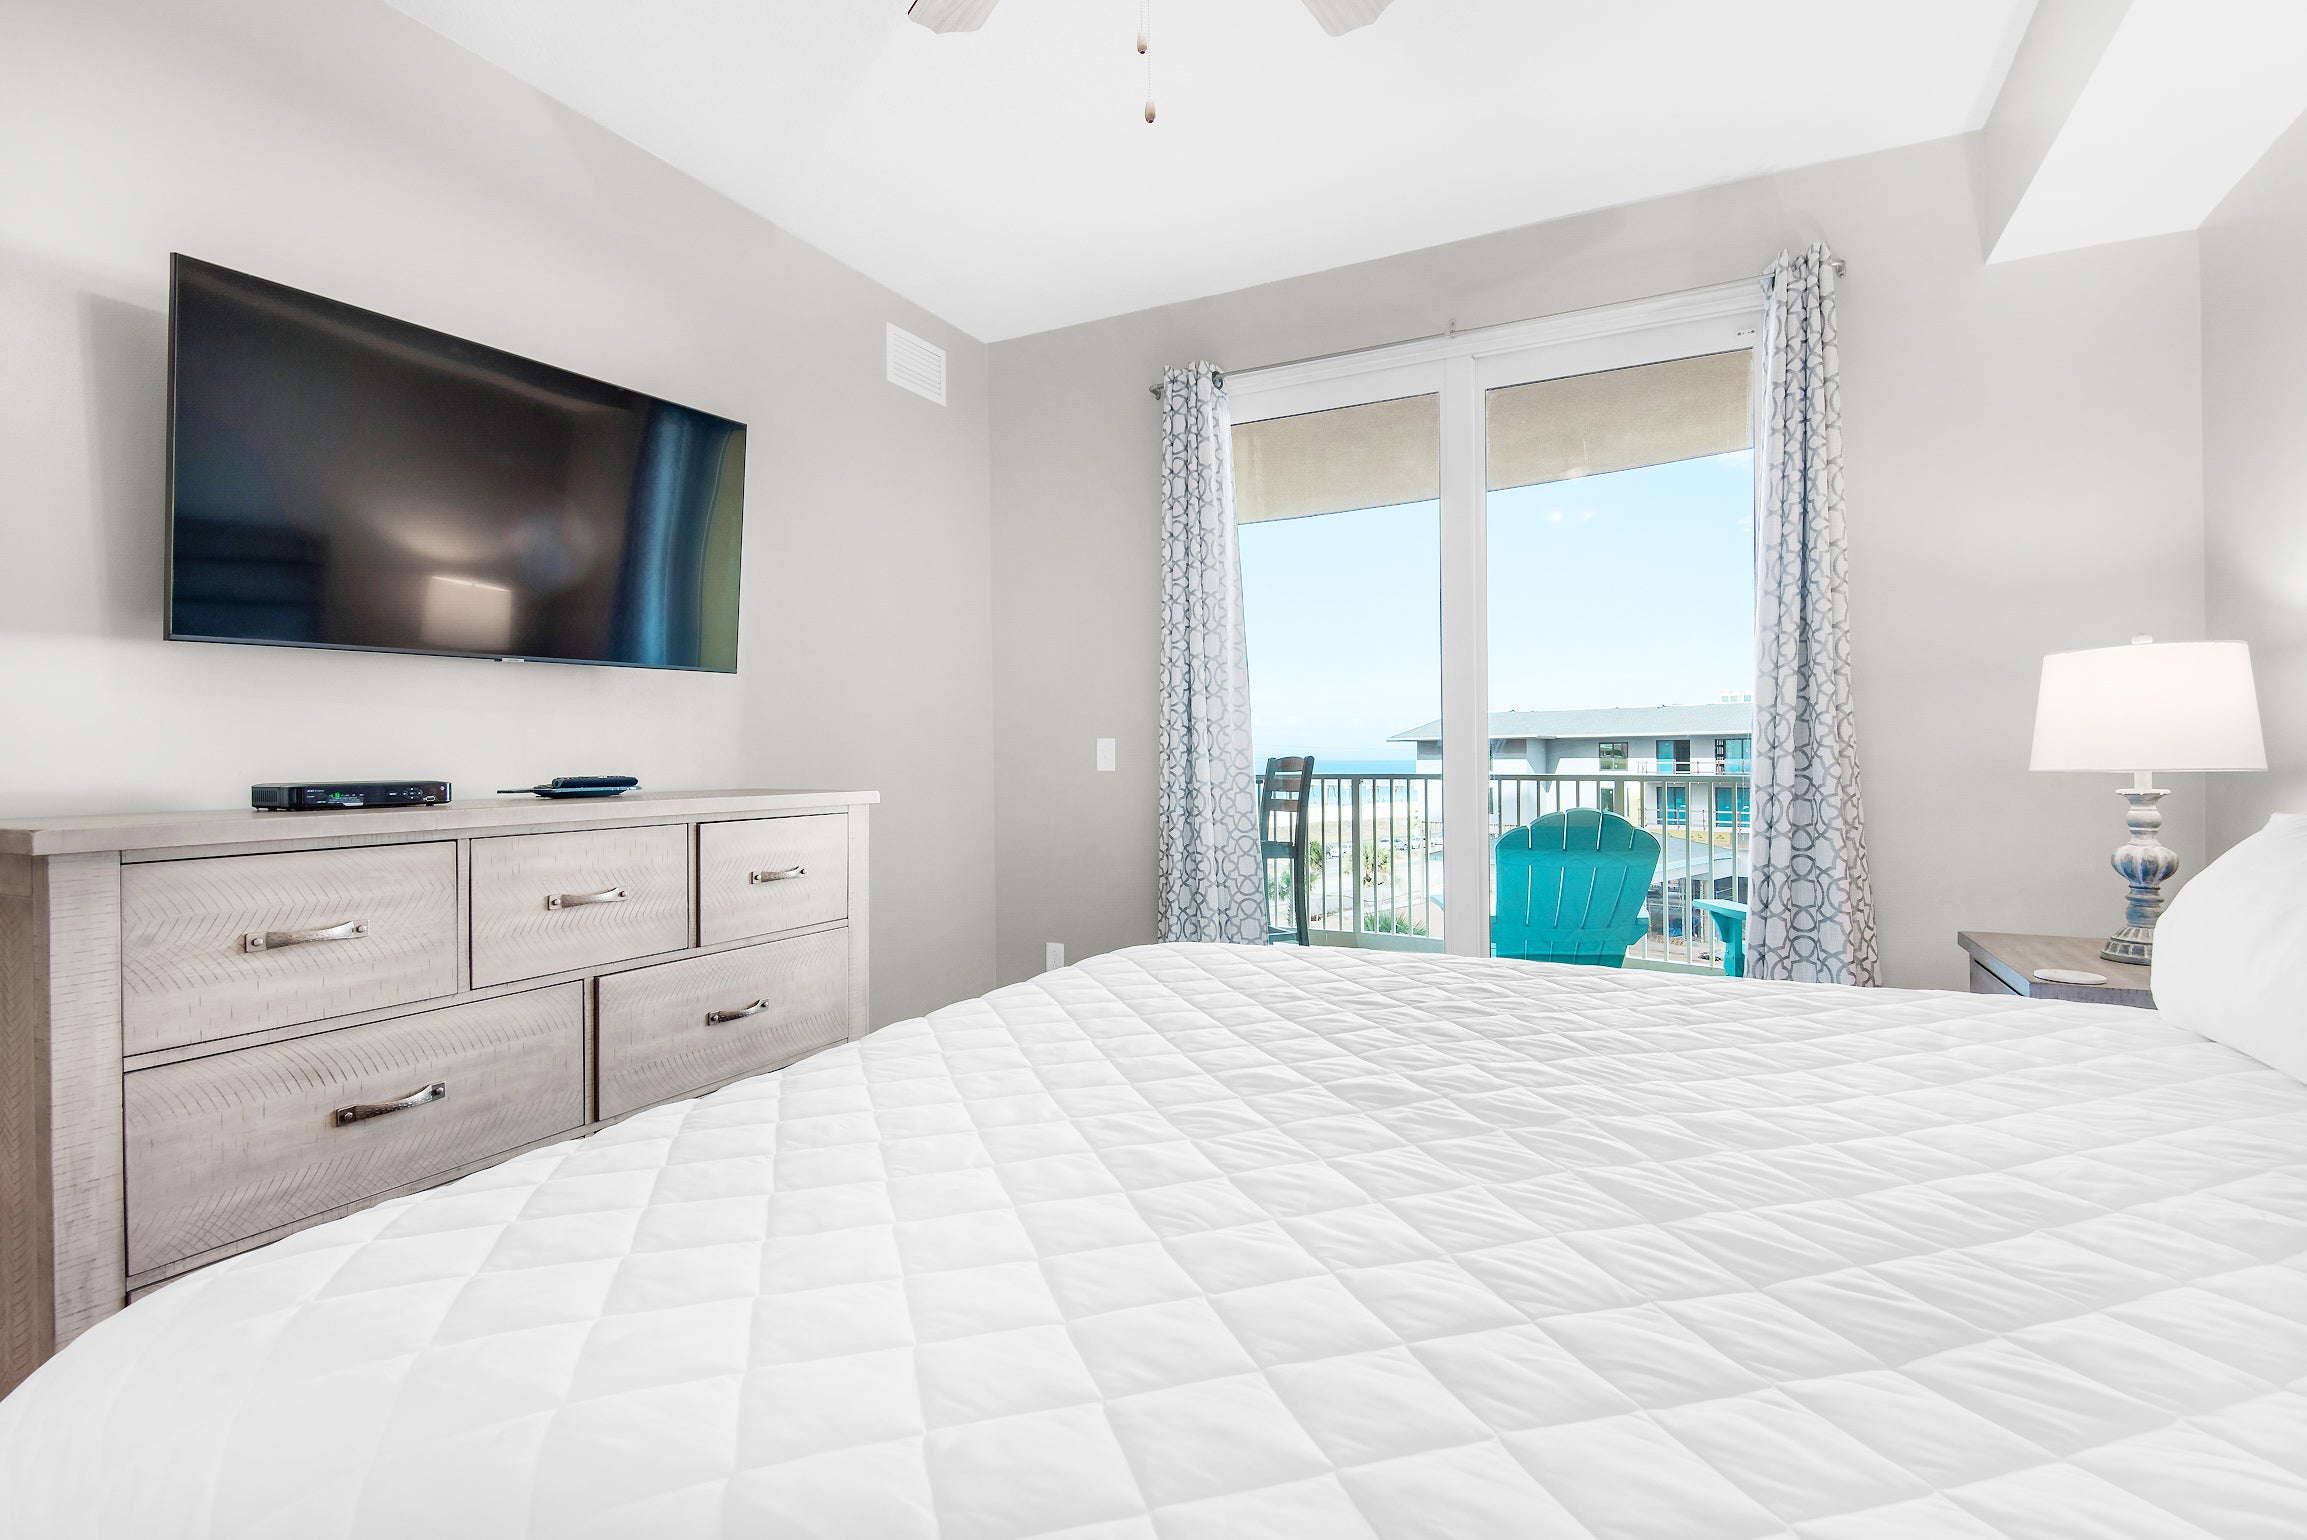 Master bedroom suite view with balcony access